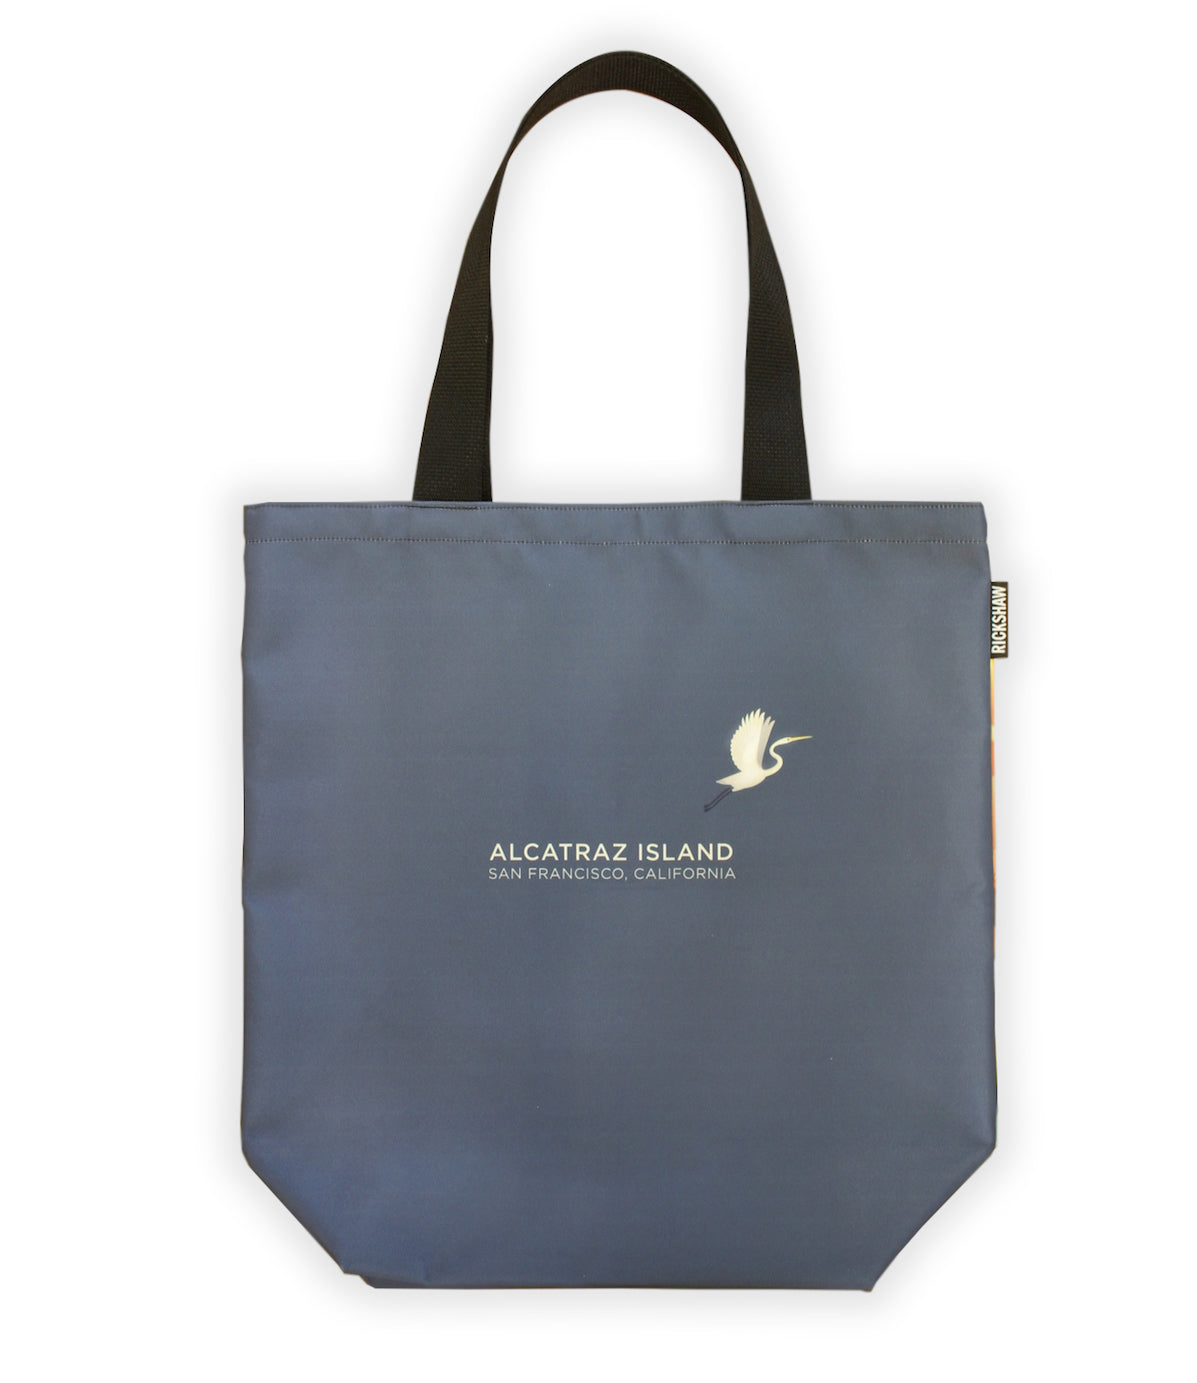 Grey-purple tote bag with white text at center “Alcatraz Island San Francisco California” and illustration of egret. Black handle.